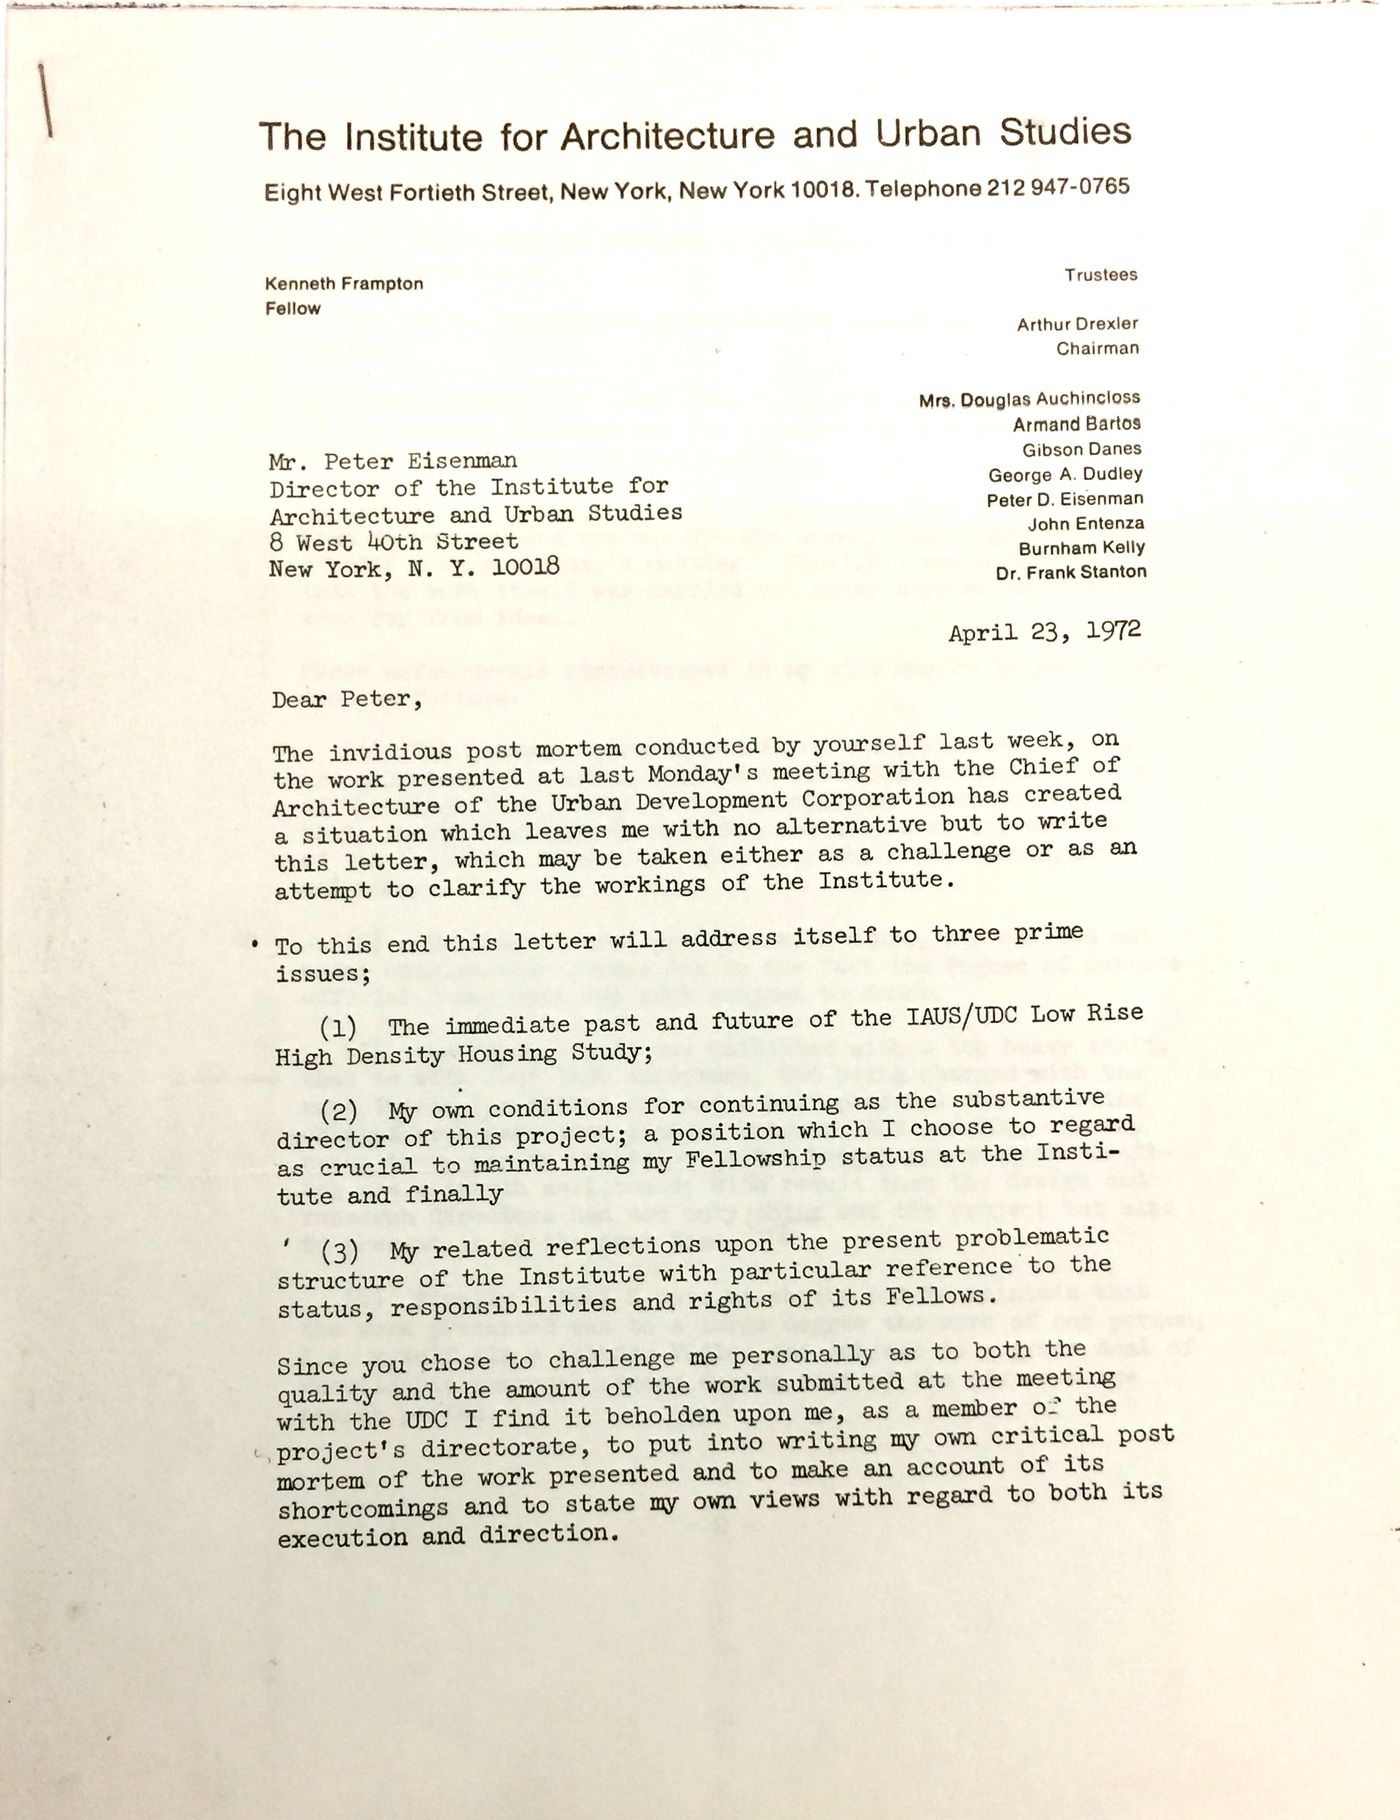 Letter from Kenneth Frampton to Peter Eisenman with a complaint related to the Institute for Architecture and Urban Studies (IAUS)